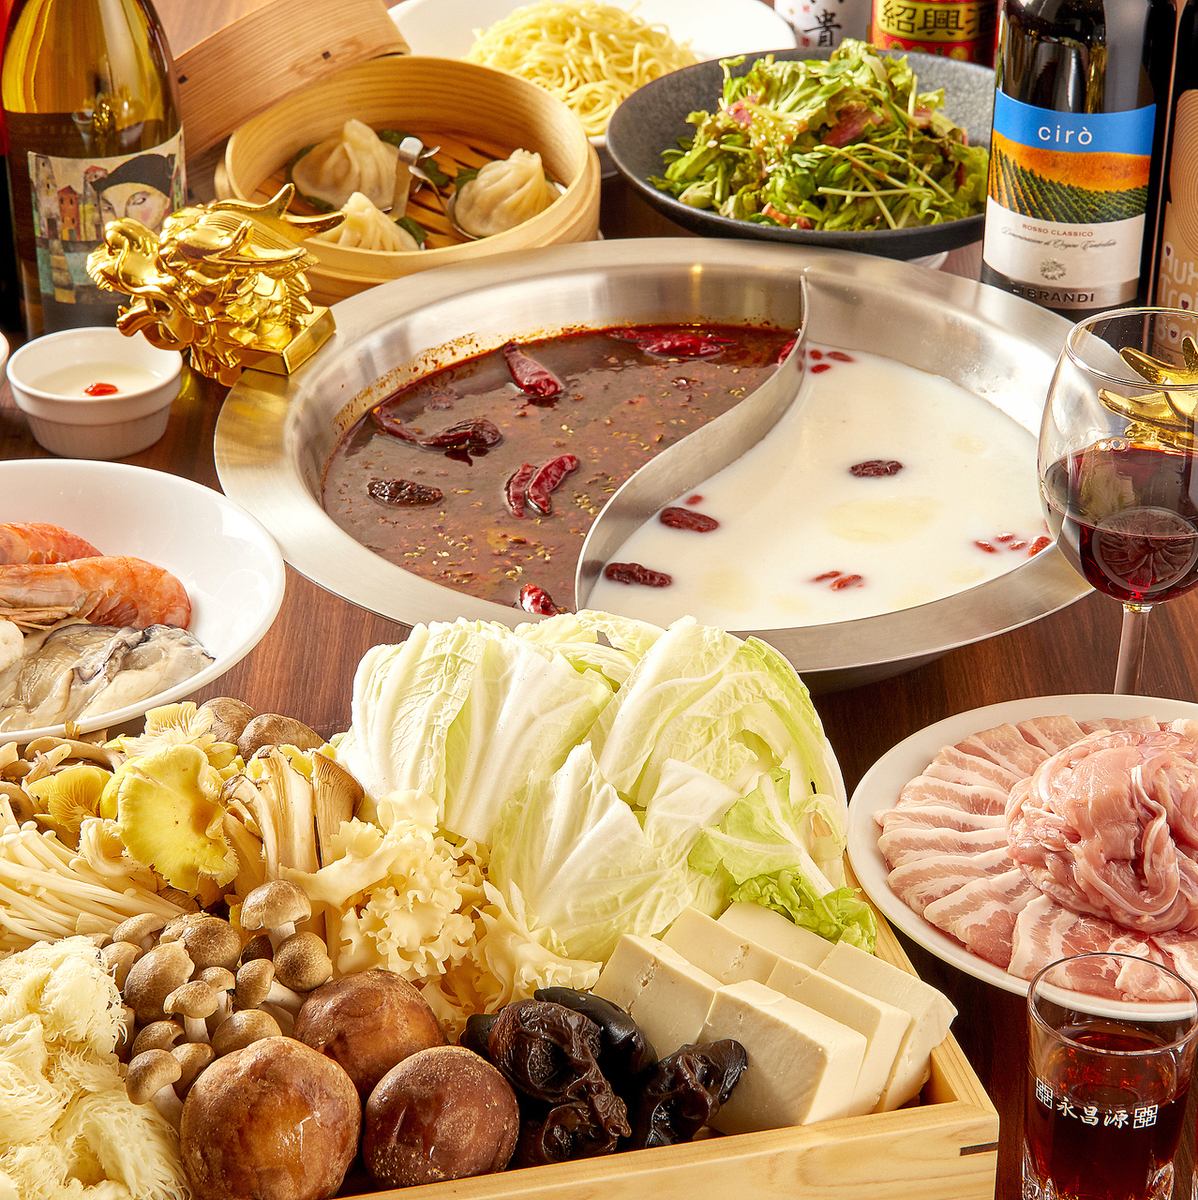 Recommended for this season♪ All-you-can-drink hot pot course with plenty of meat and vegetables